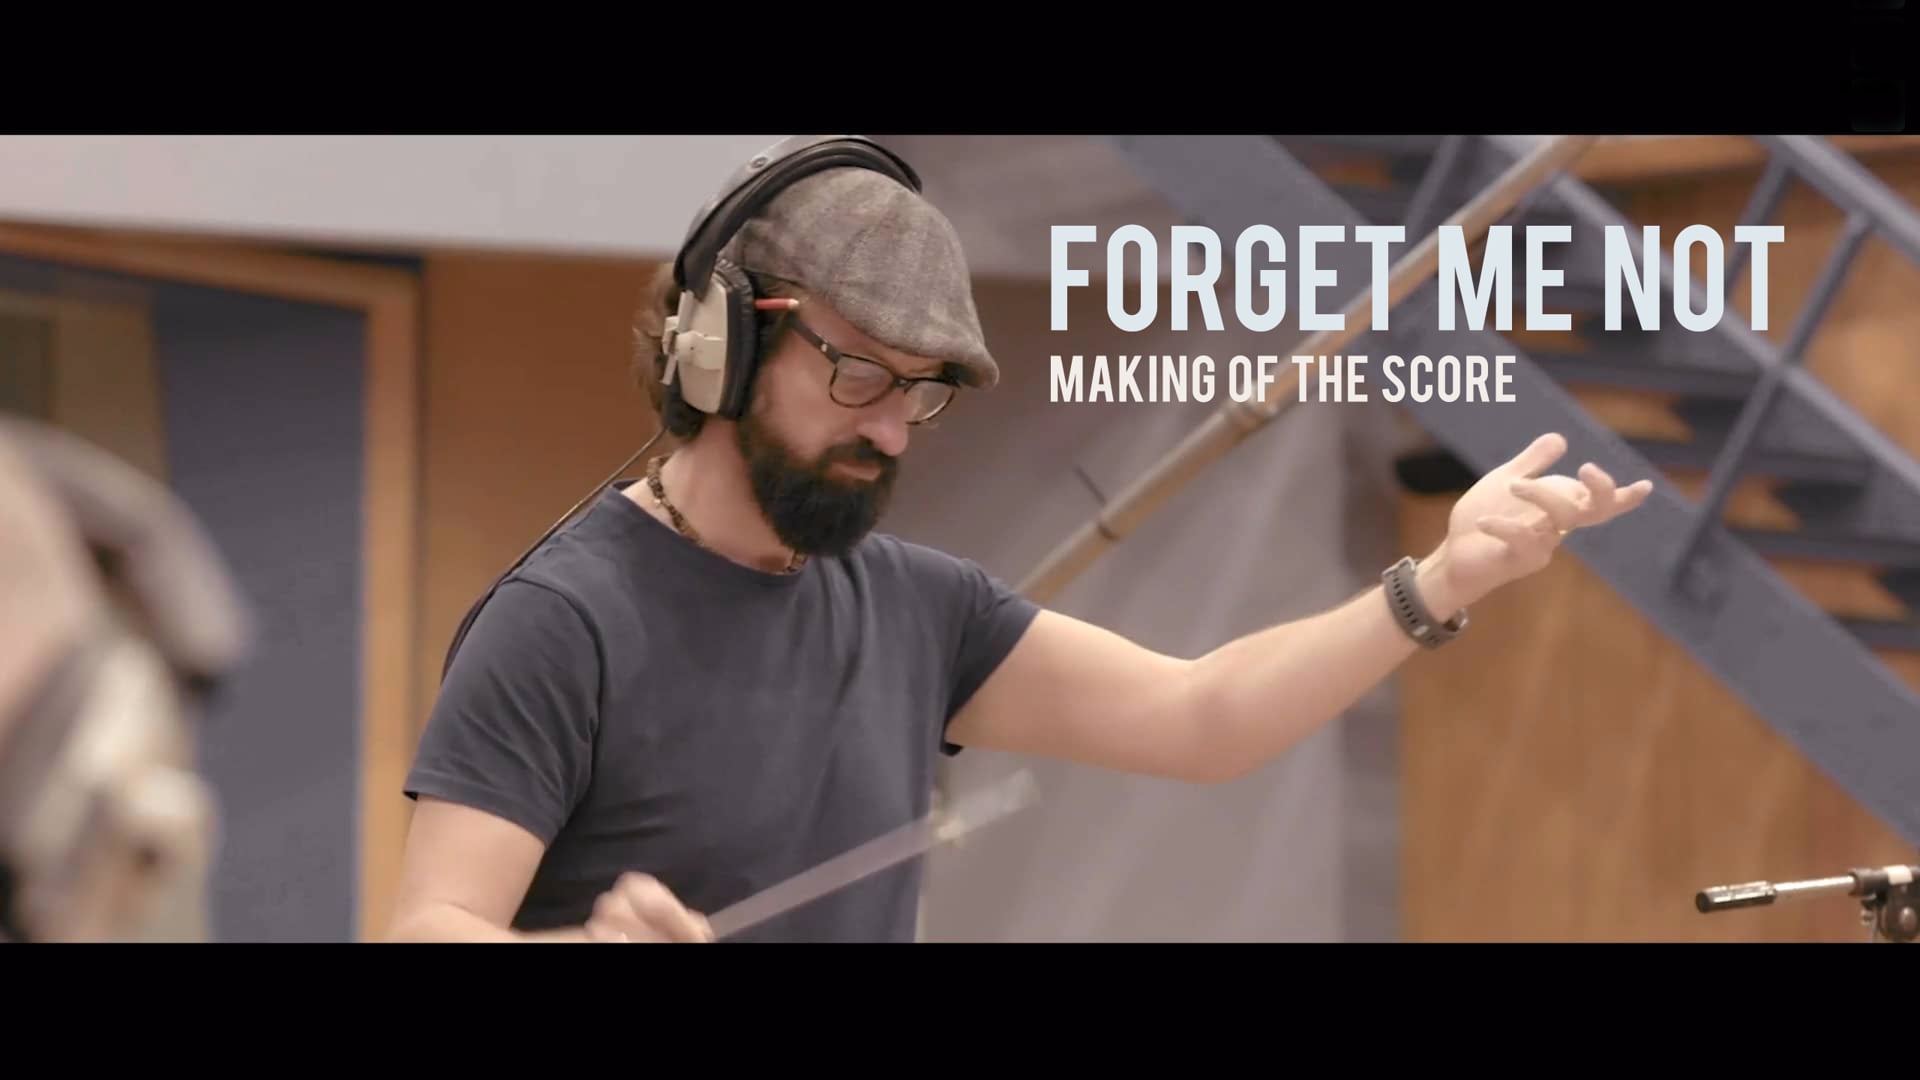 FORGET ME NOT | The Score | Composed by MATTHEW SLATER